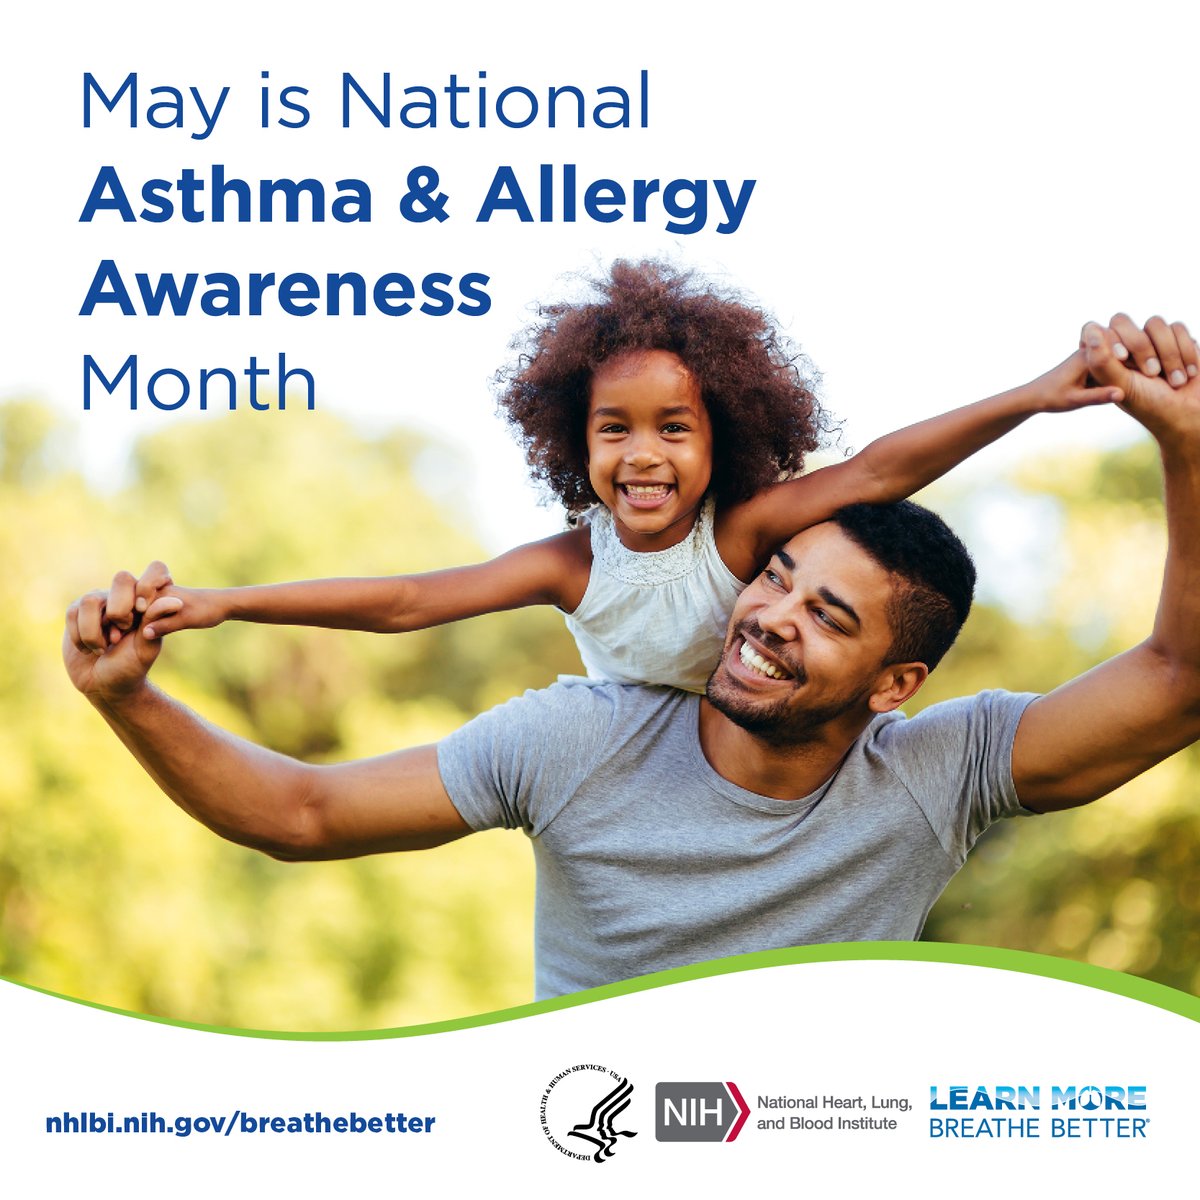 DPH aims to identify industries, occupations, and exposures that put workers at risk for work-related asthma. Learn more: mass.gov/work-related-a… #AsthmaAwarenessMonth